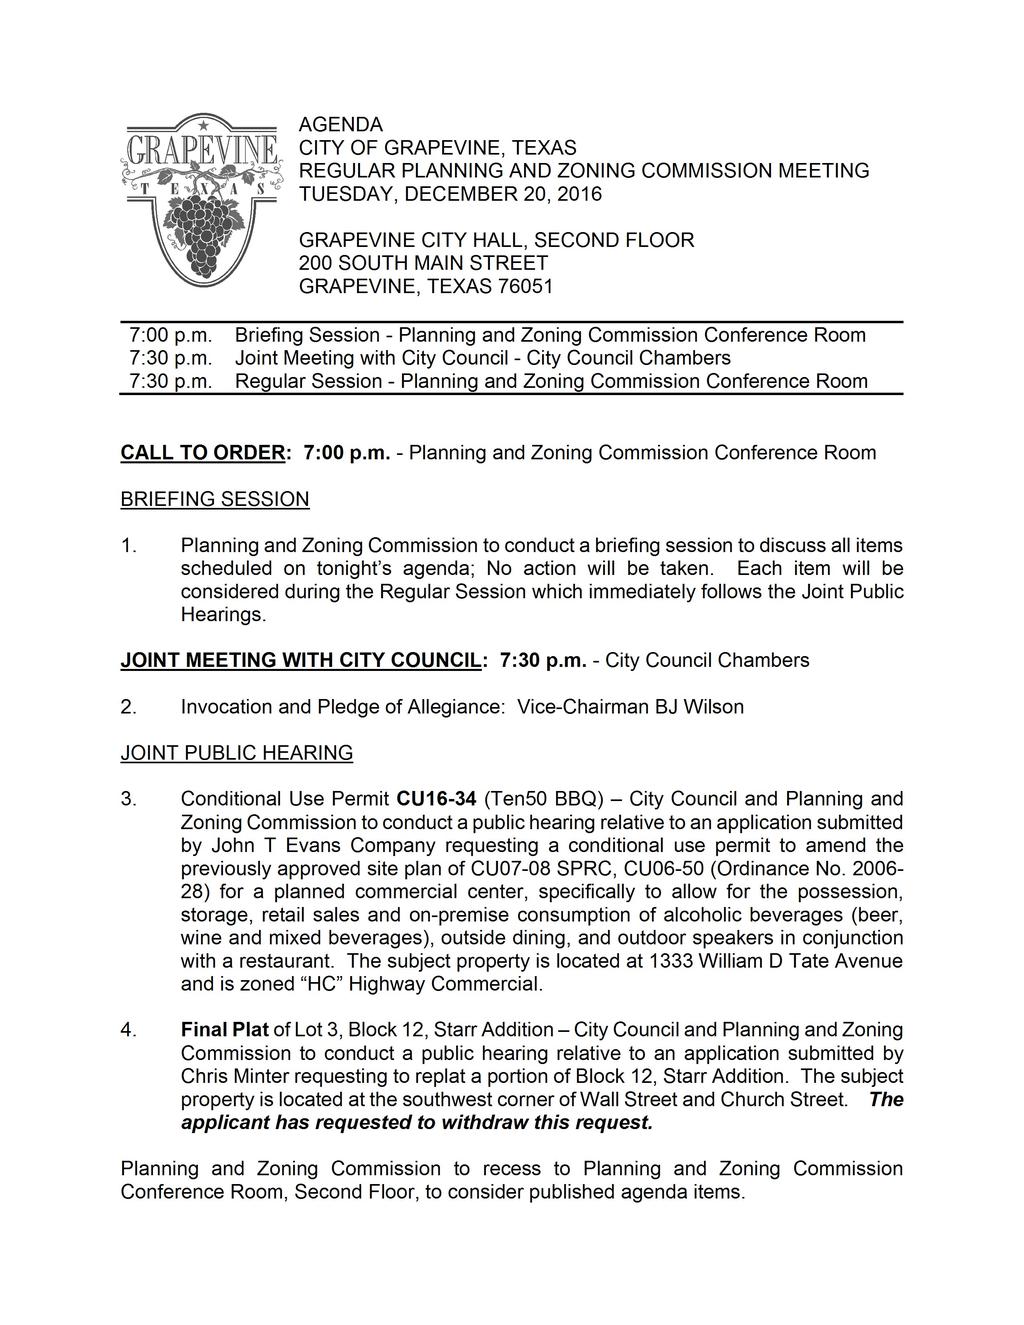 GEND T VINE E, CITY OF GRPEVINE, TEXS REGULR PLNNING ND ZONING COMMISSION MEETING s TUESDY, DECEMBER 20, 2016 GRPEVINE CITY HLL, SECOND FLOOR 200 SOUTH MIN STREET GRPEVINE, TEXS 76051 7: 00 p. m.